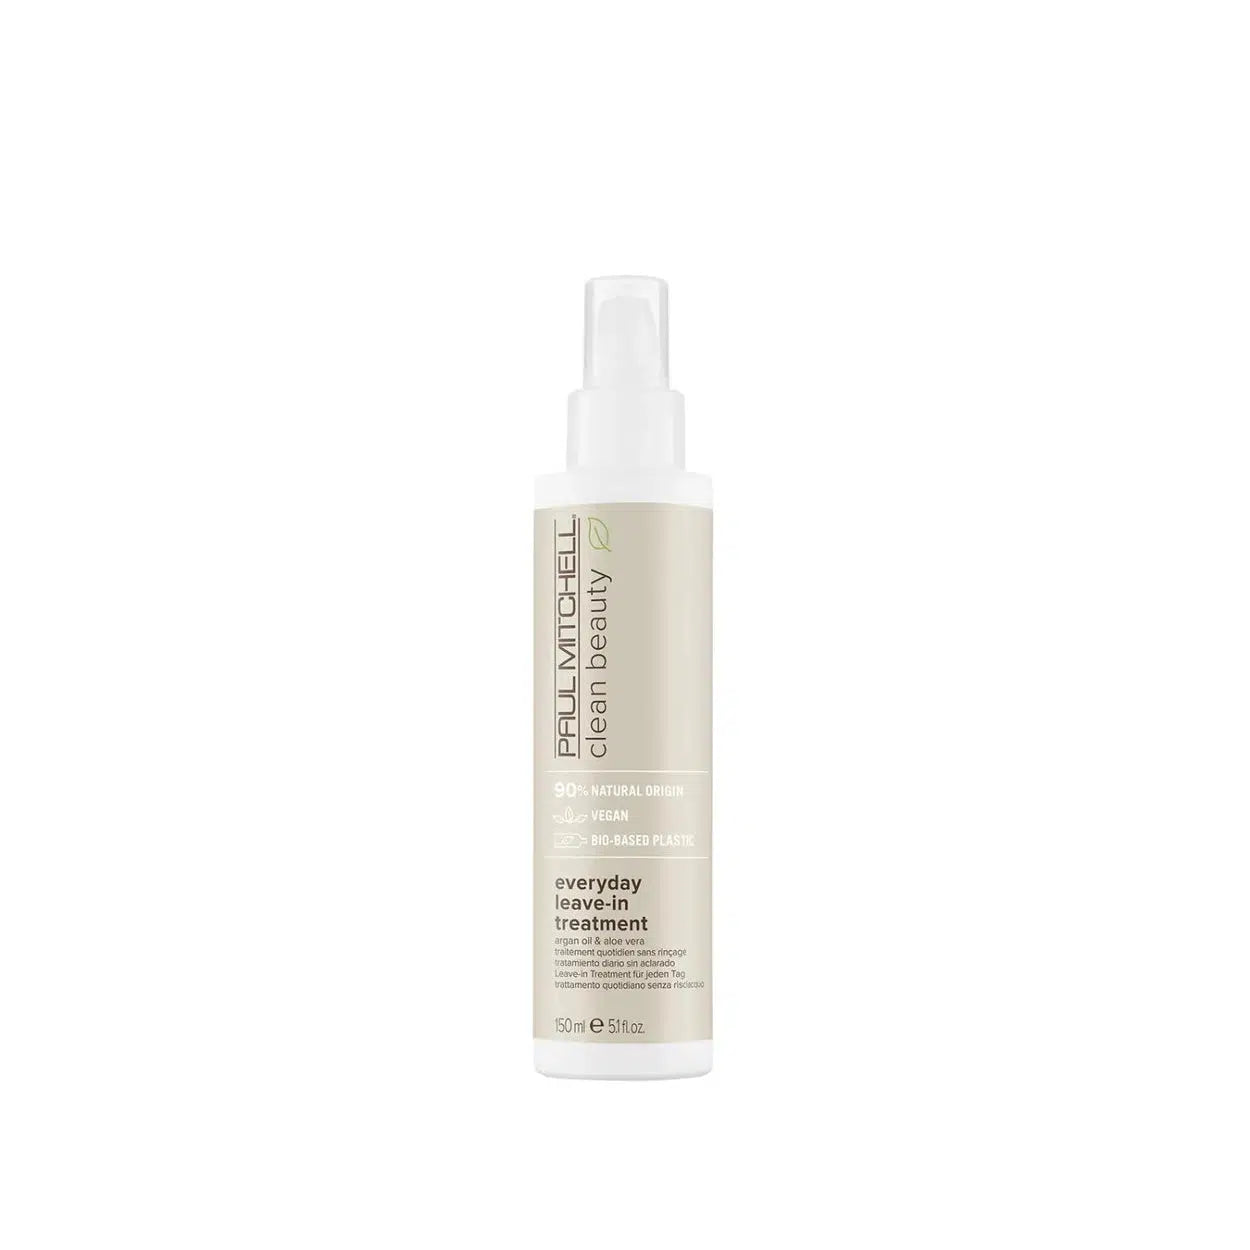 Paul Mitchell Clean Beauty Everyday leave in treatment 150ml